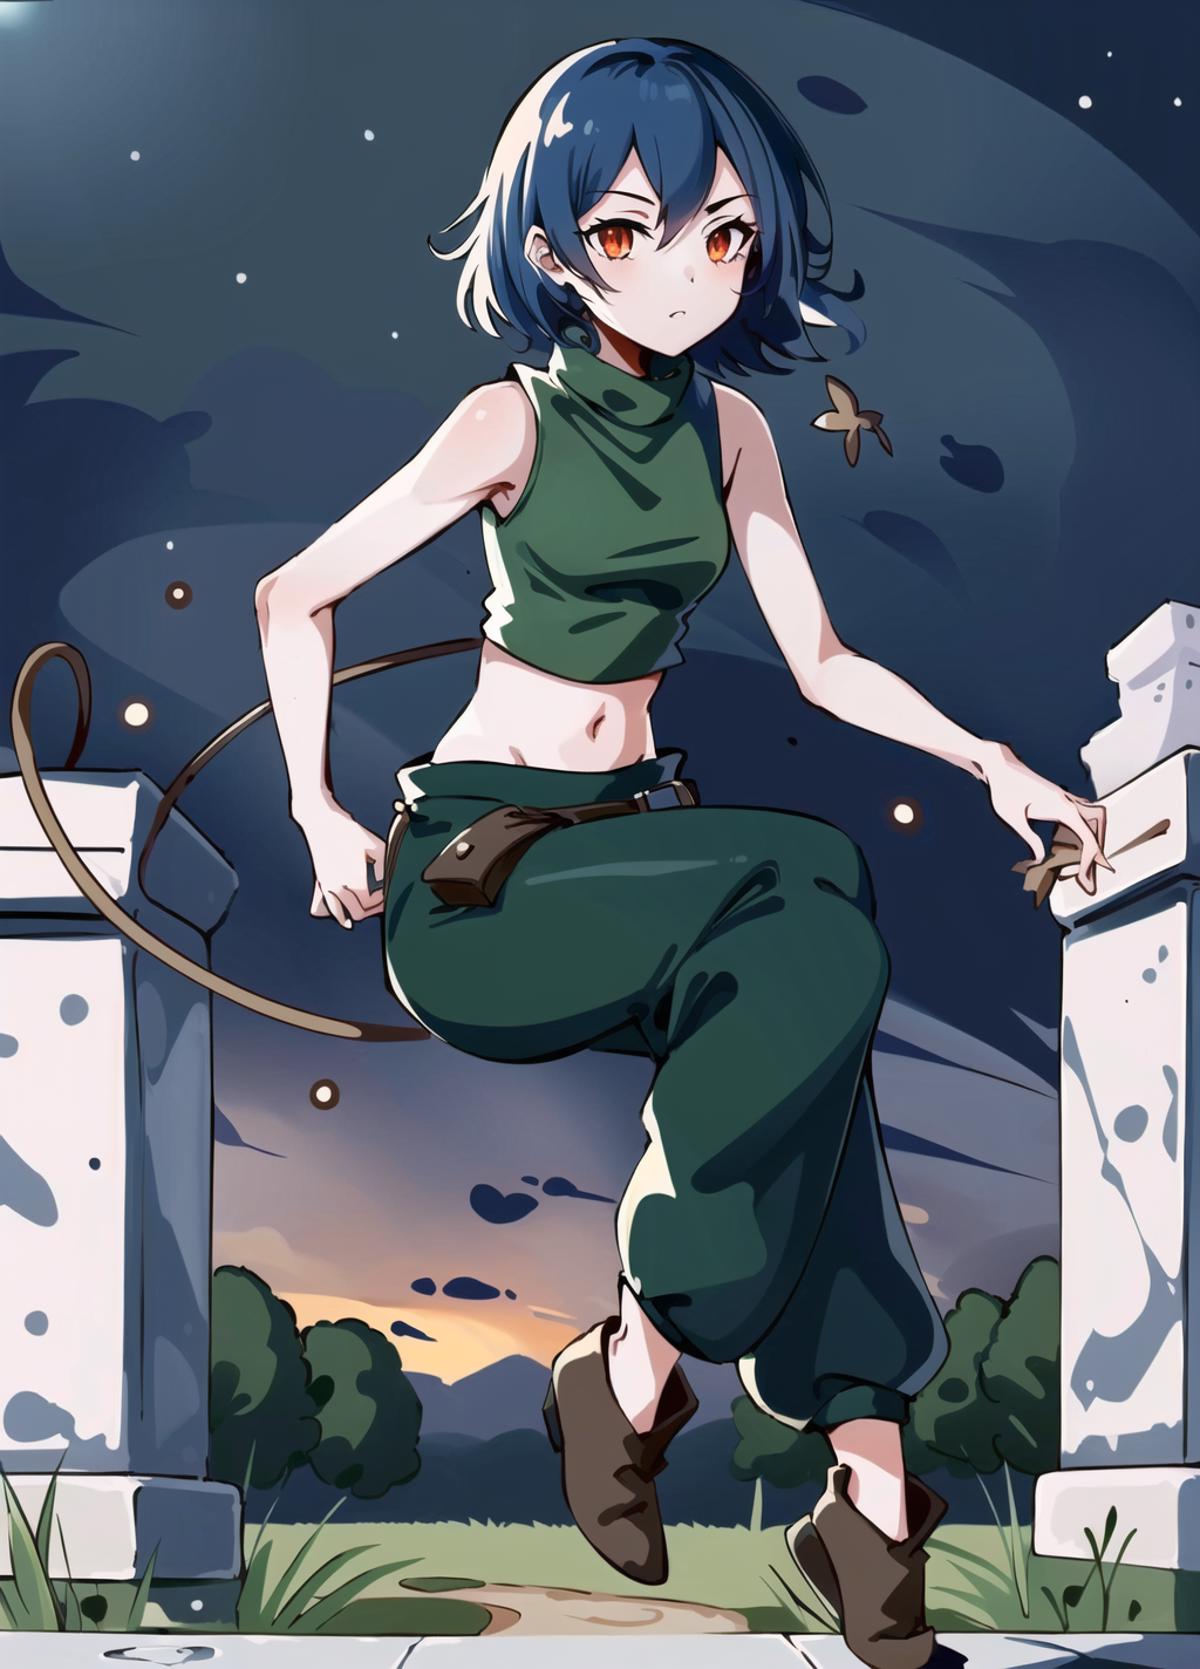 Misery (Cave Story) image by coileralt